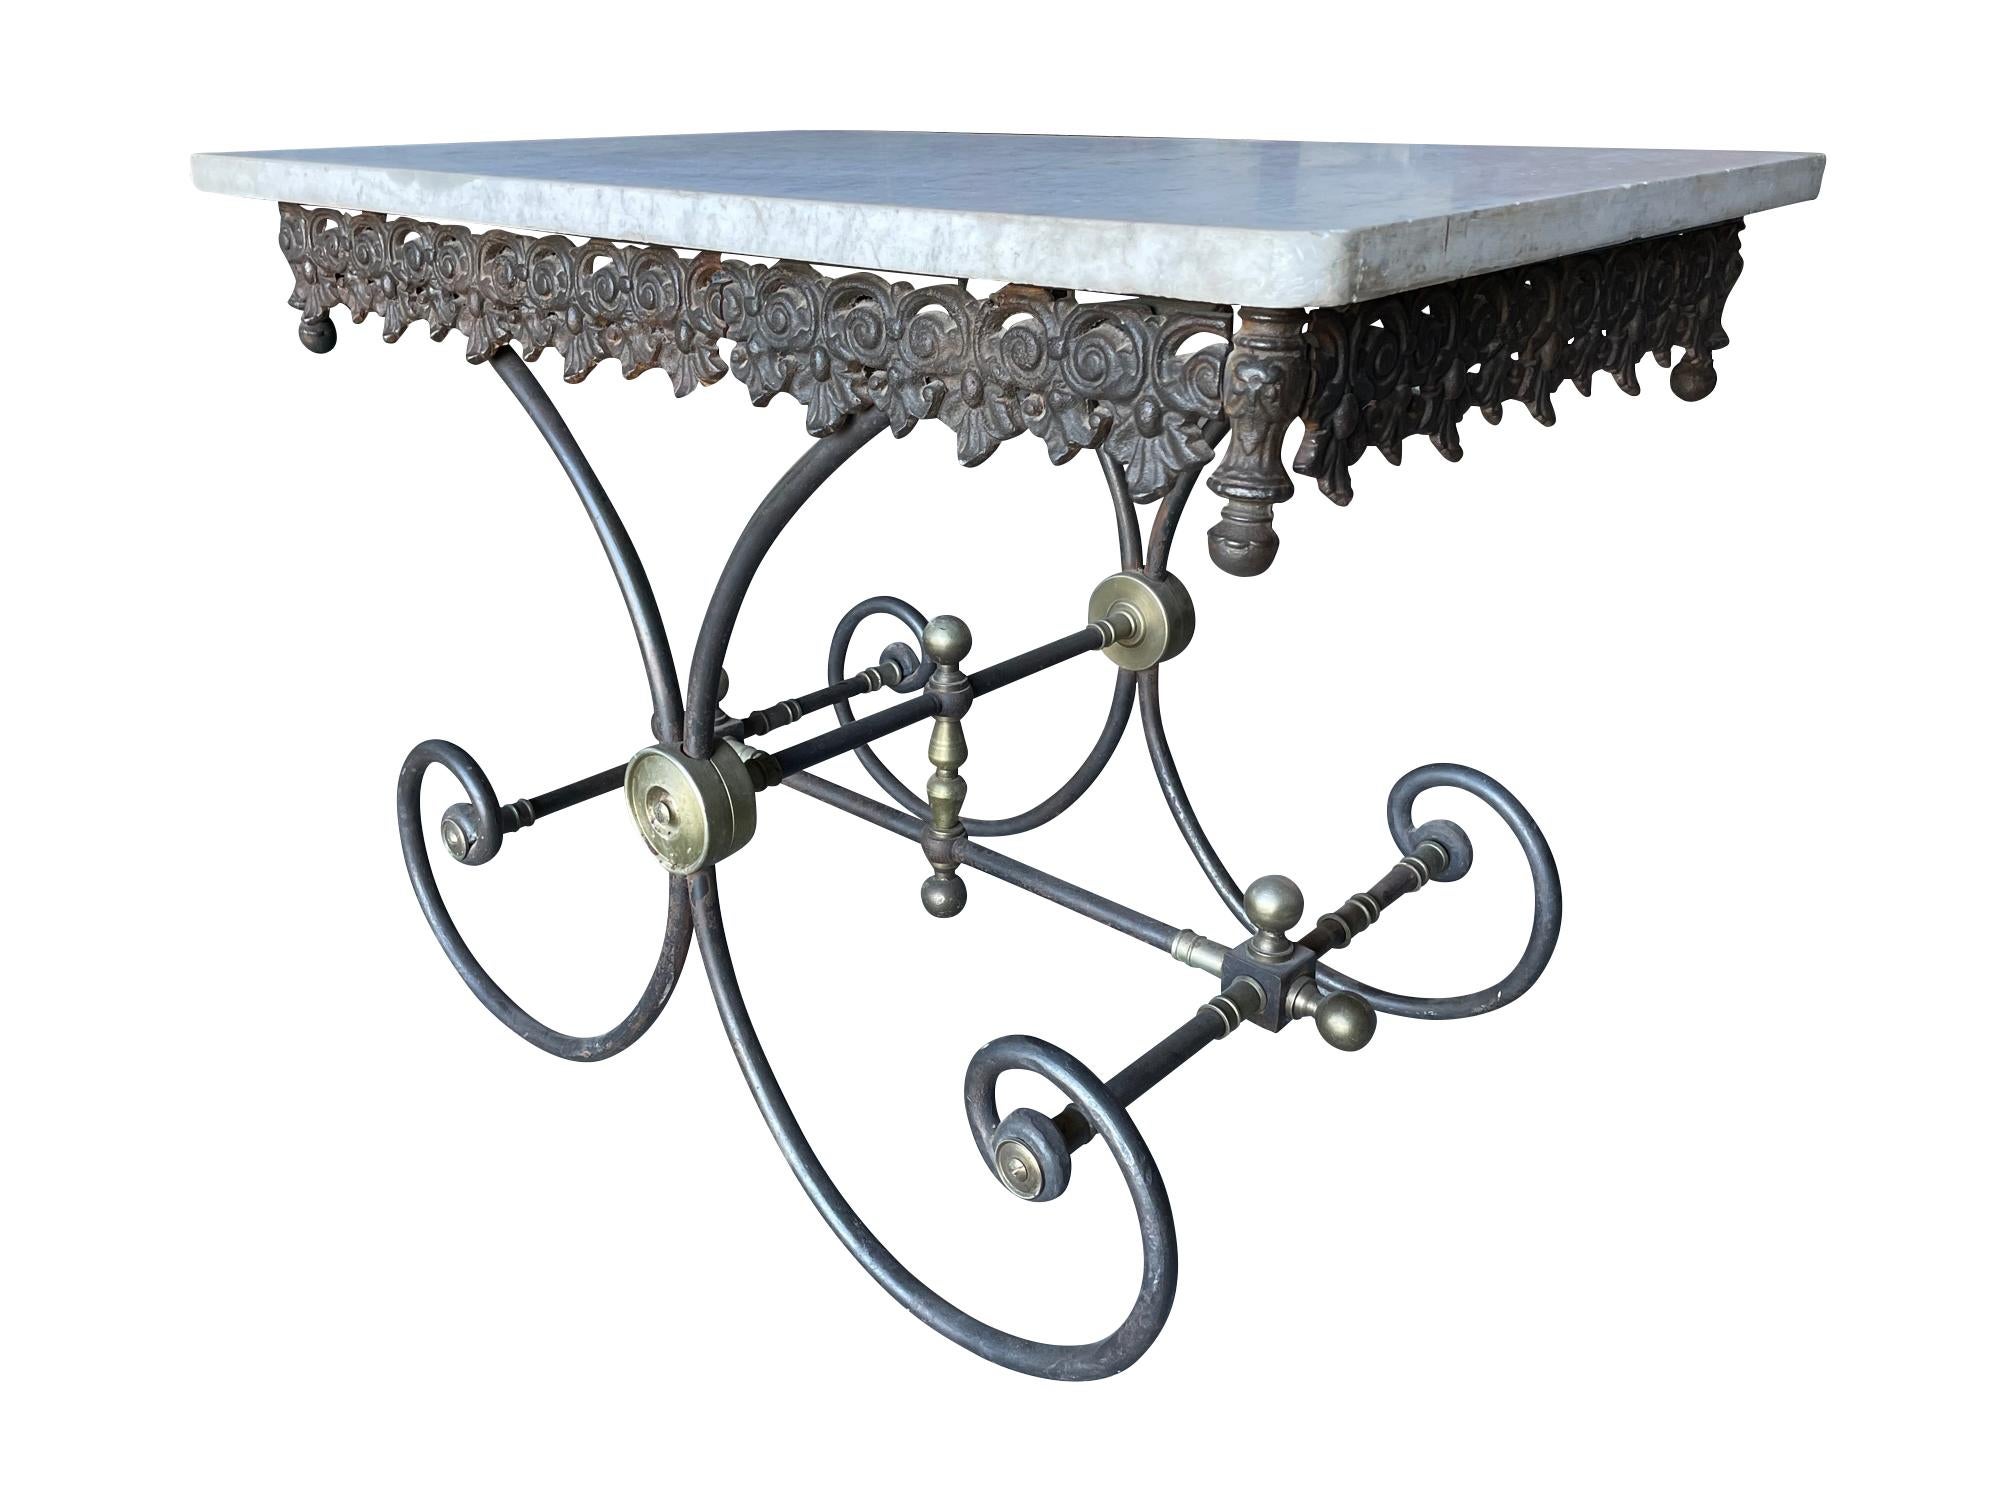 Hand-Crafted French Patisserie Table with Marble Top